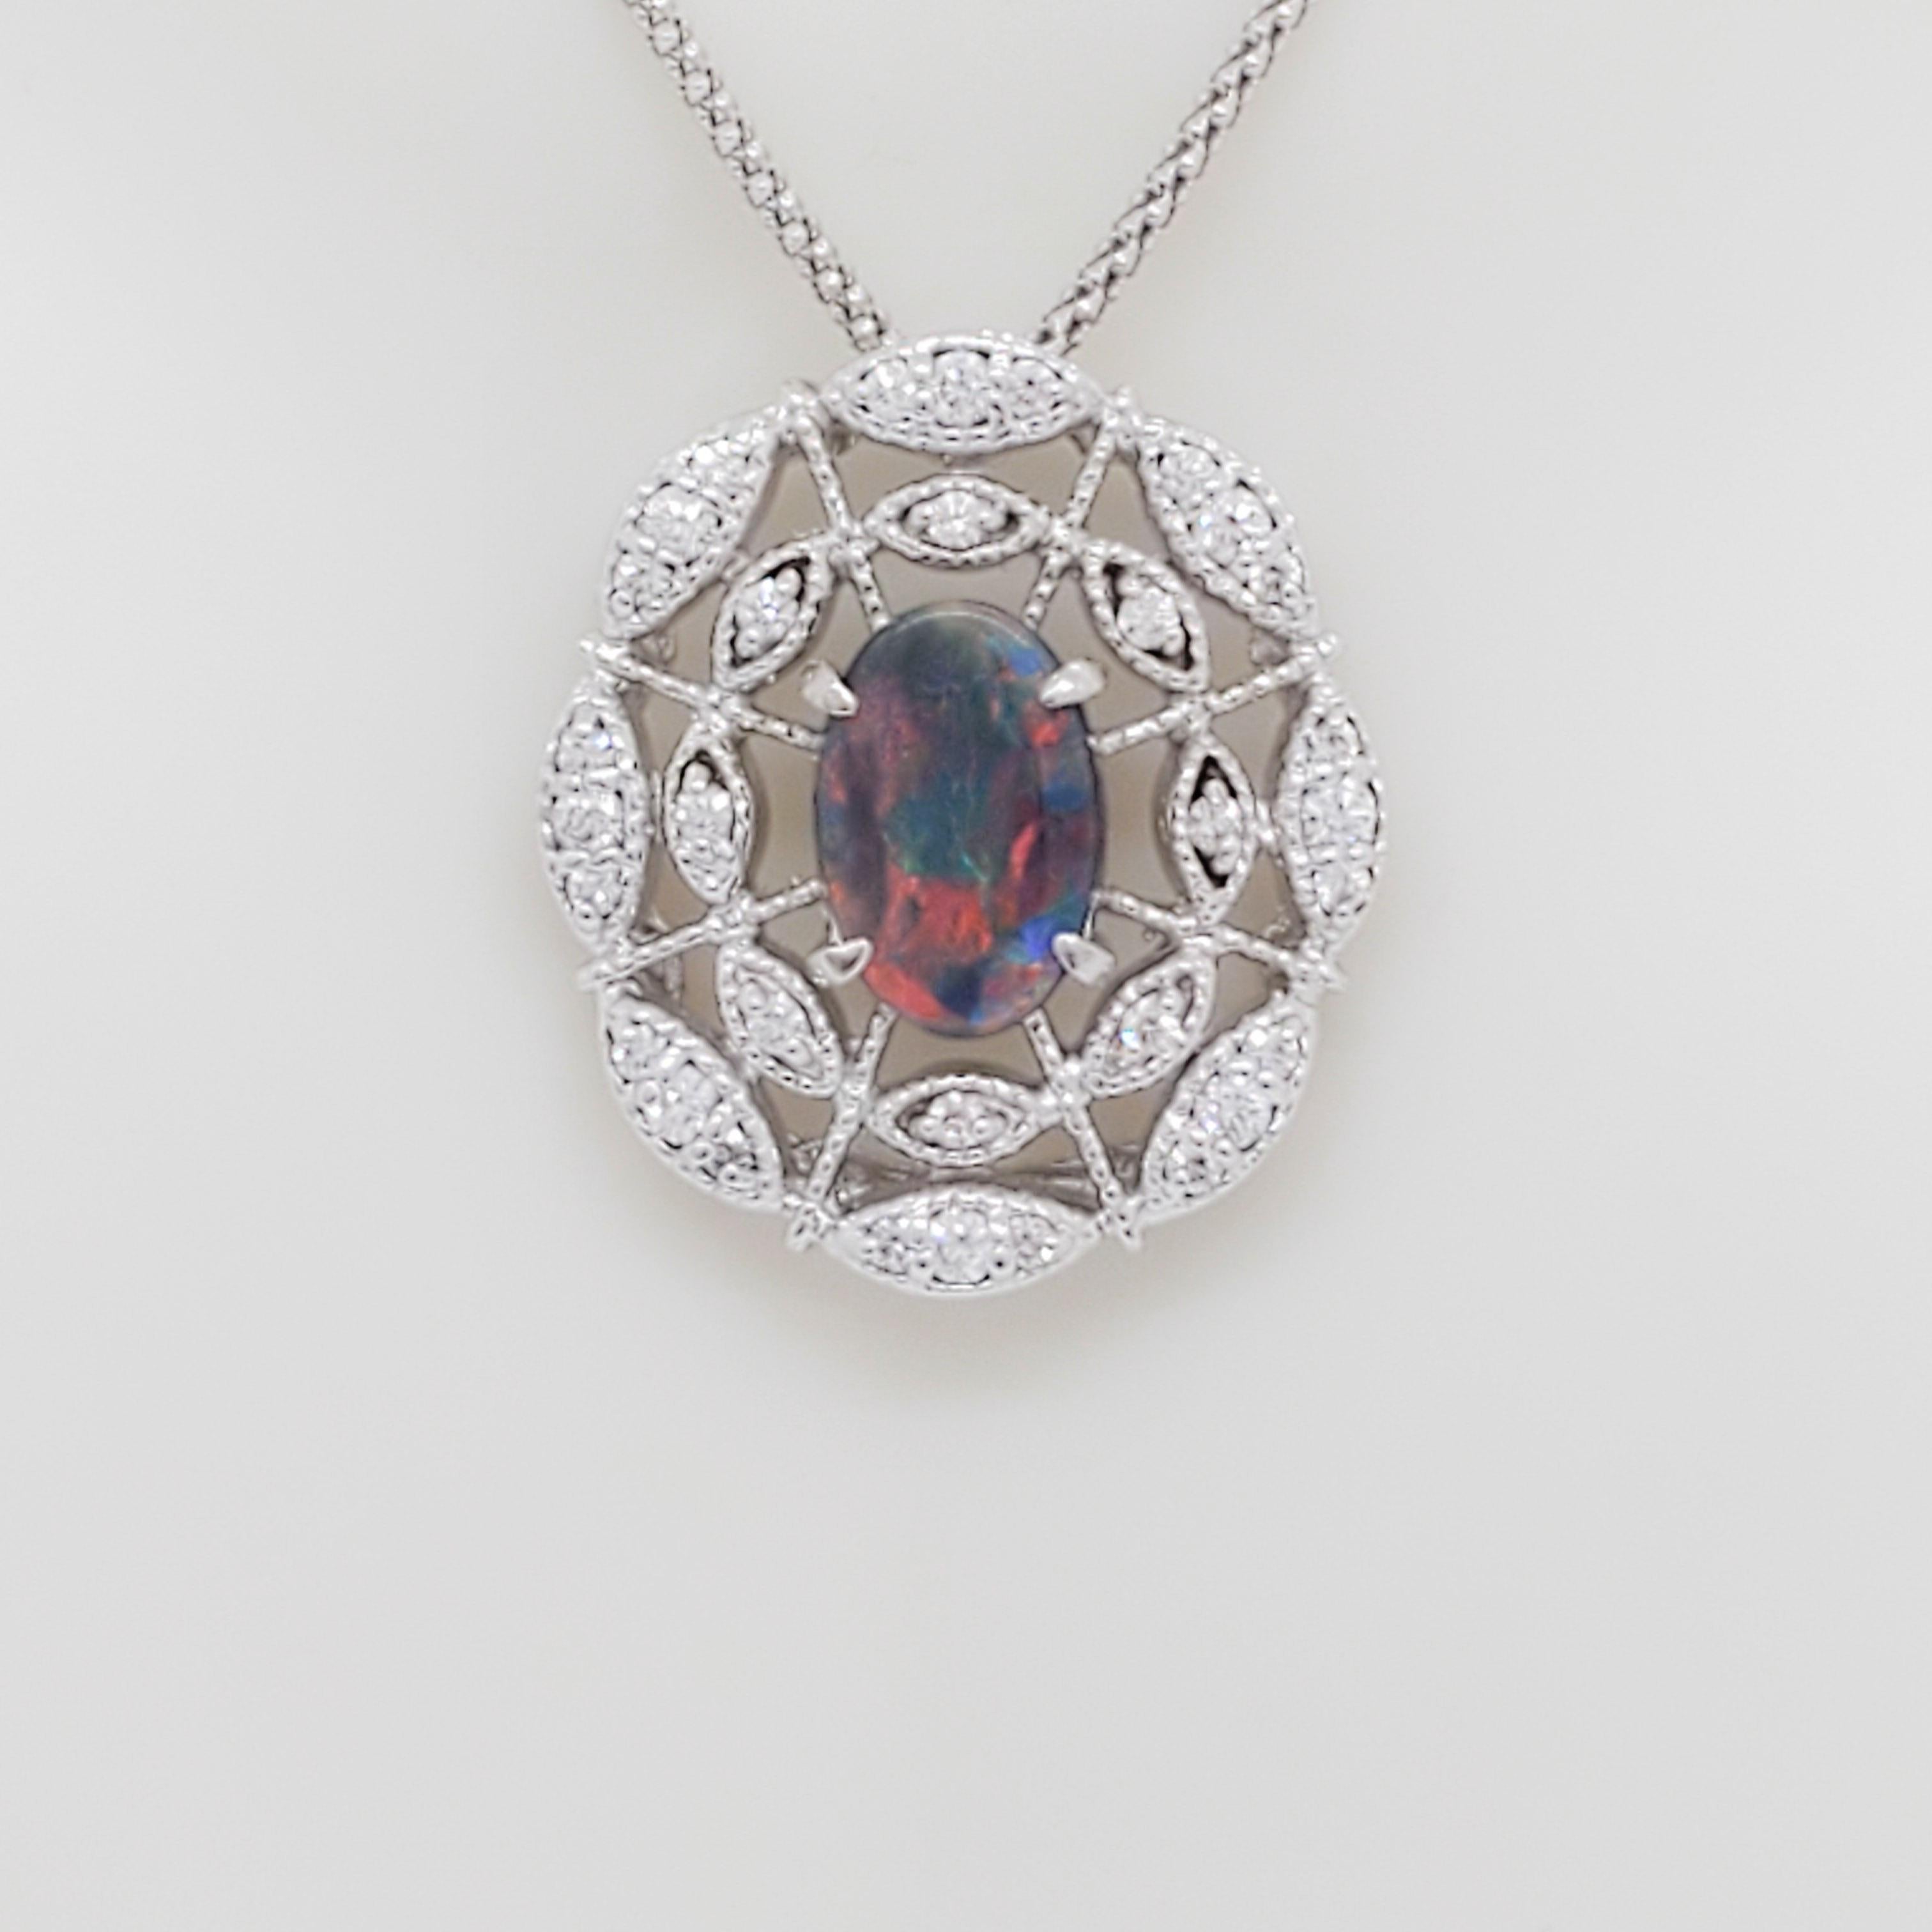 Gorgeous 0.91 ct. black opal ova with 0.52 ct. good quality white diamond rounds.  Handmade in 18k white gold.  Chain is 18